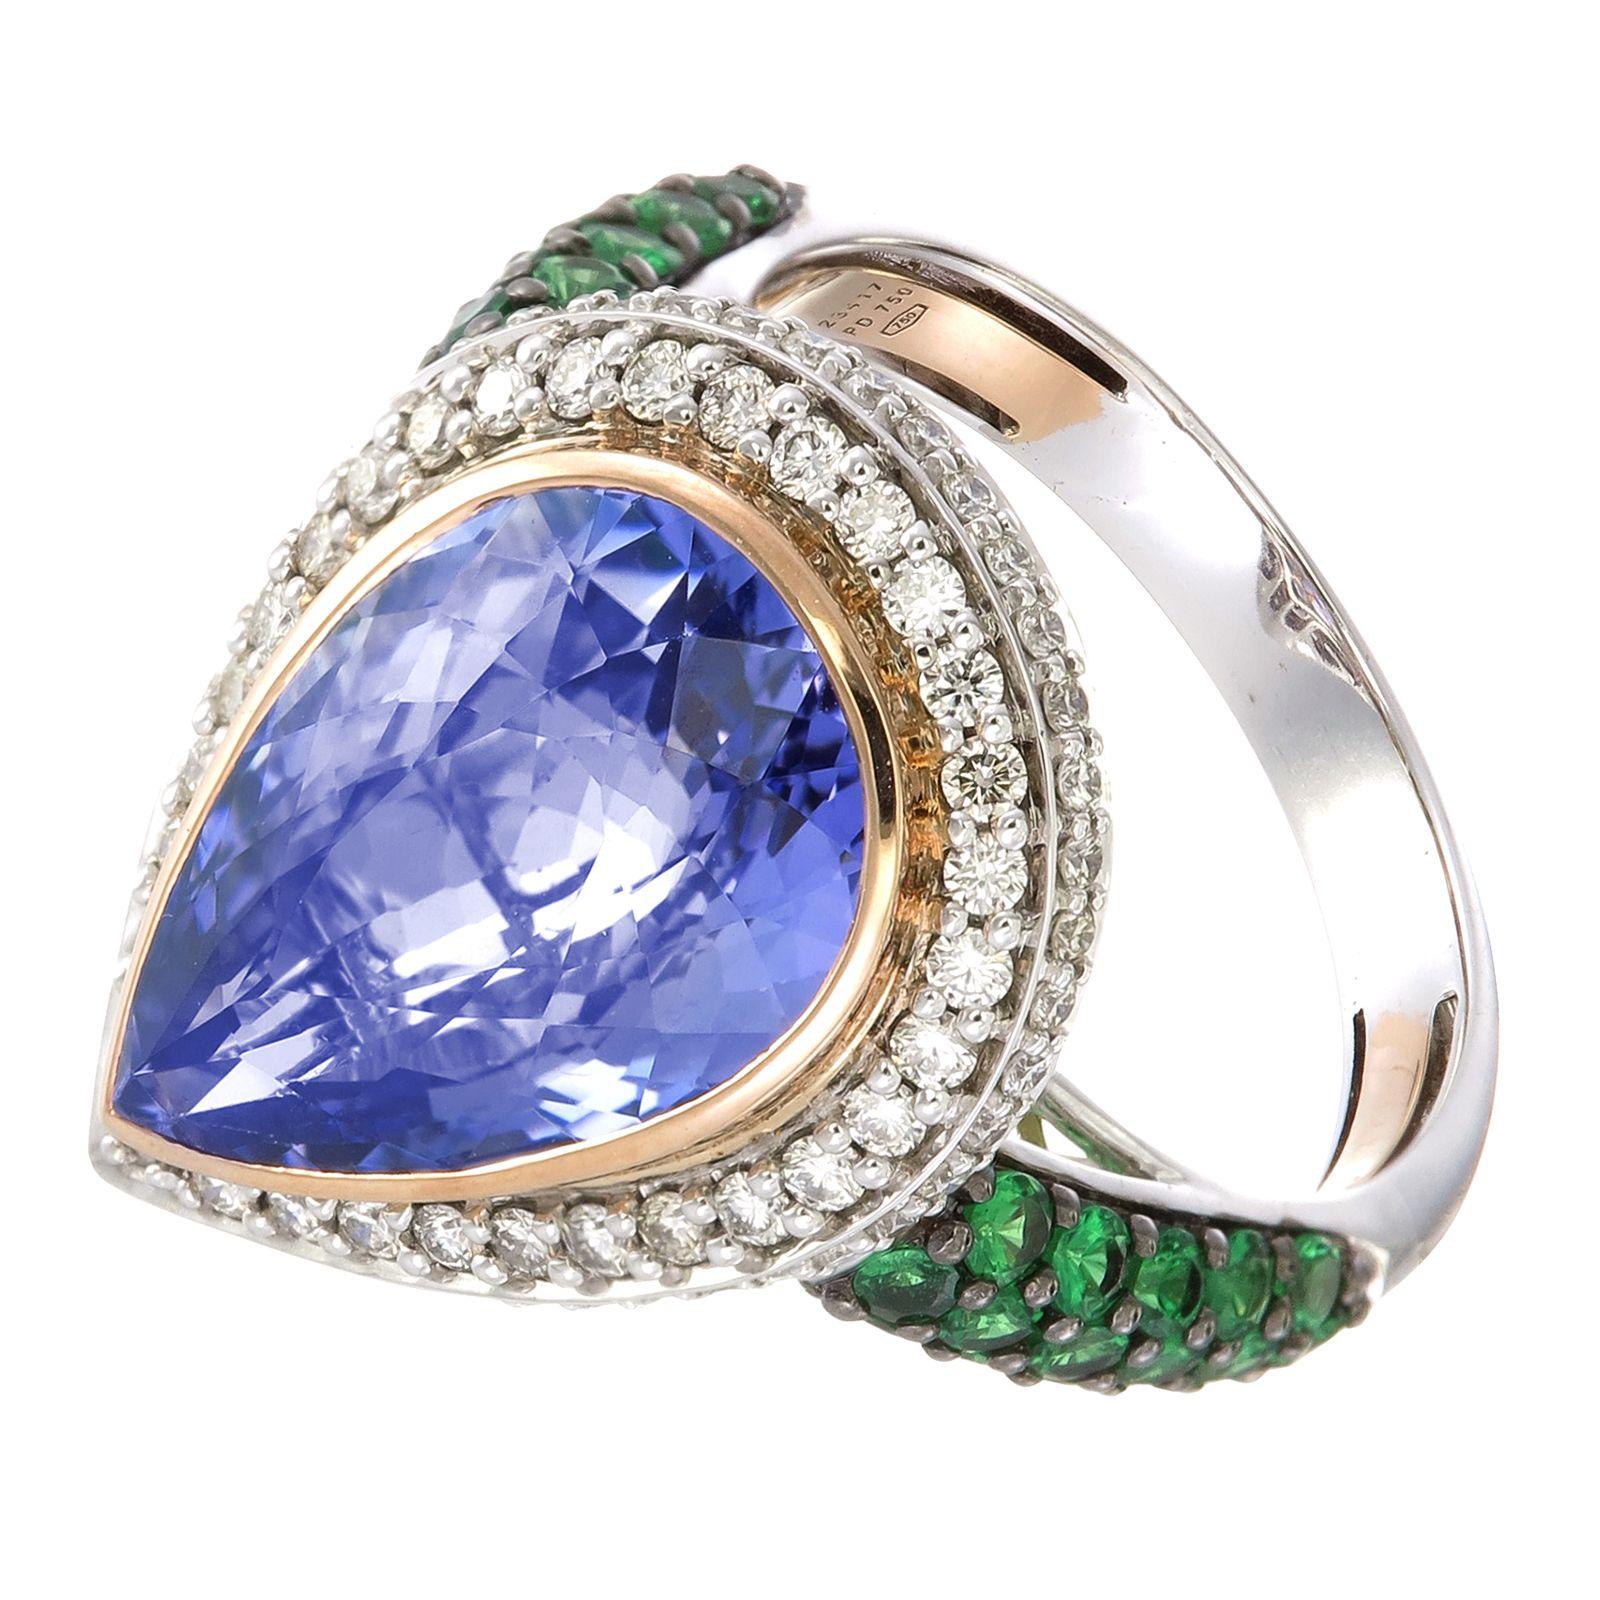 A 9.75-tear-shaped translucent Tanzanite is framed by sparkling 0.58-carat White Diamonds on a Palladium and 18K Gold ring. On each side of the shank is a minty splash of bright green from clusters of 0.93-carat Tsavorite Garnet. An adjustable gold